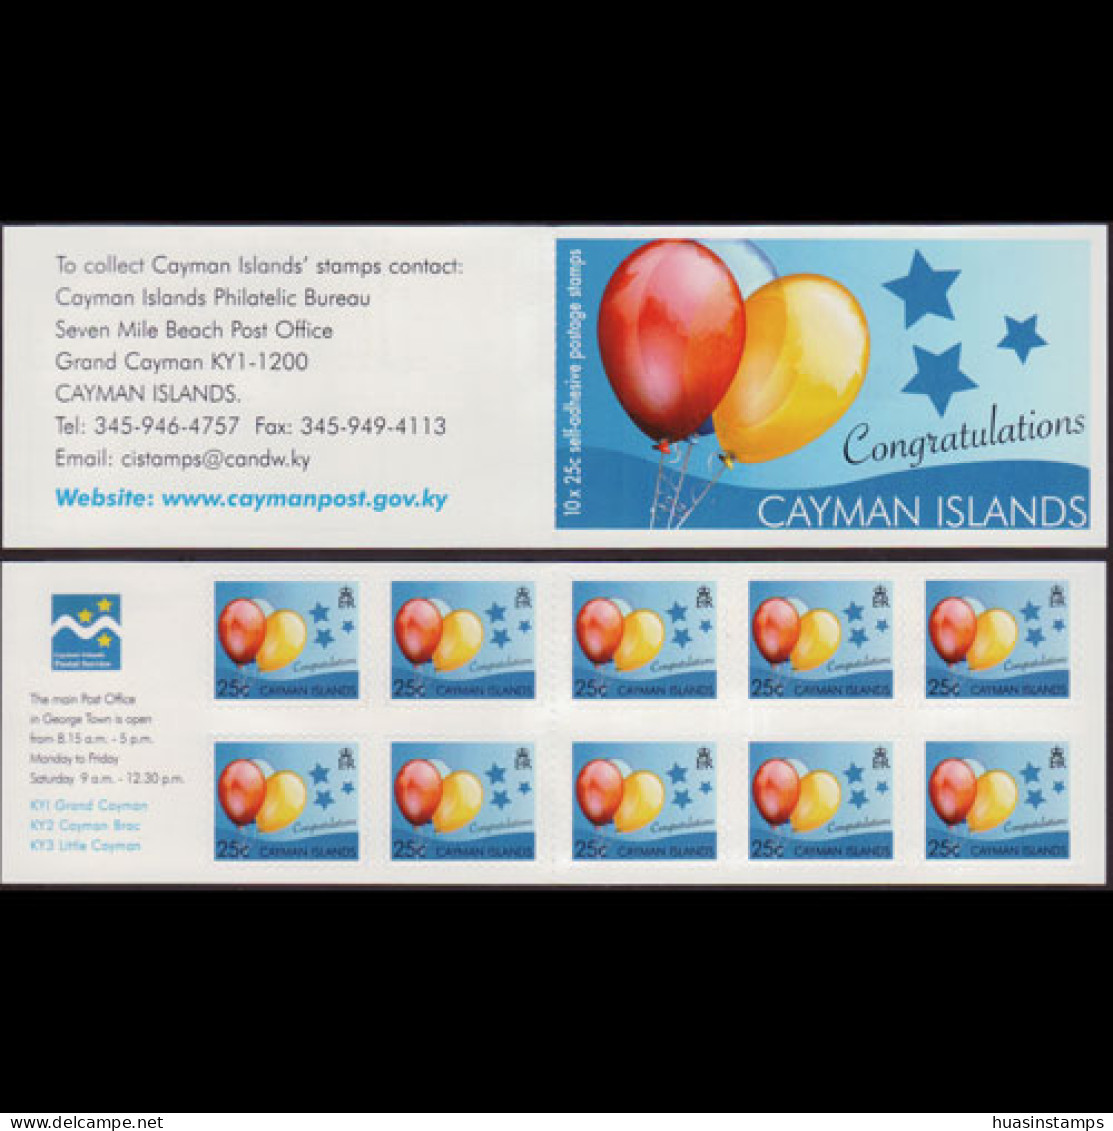 CAYMAN IS. 2008 - Scott# 1017A Booklet-Greeting MNH - Cayman Islands